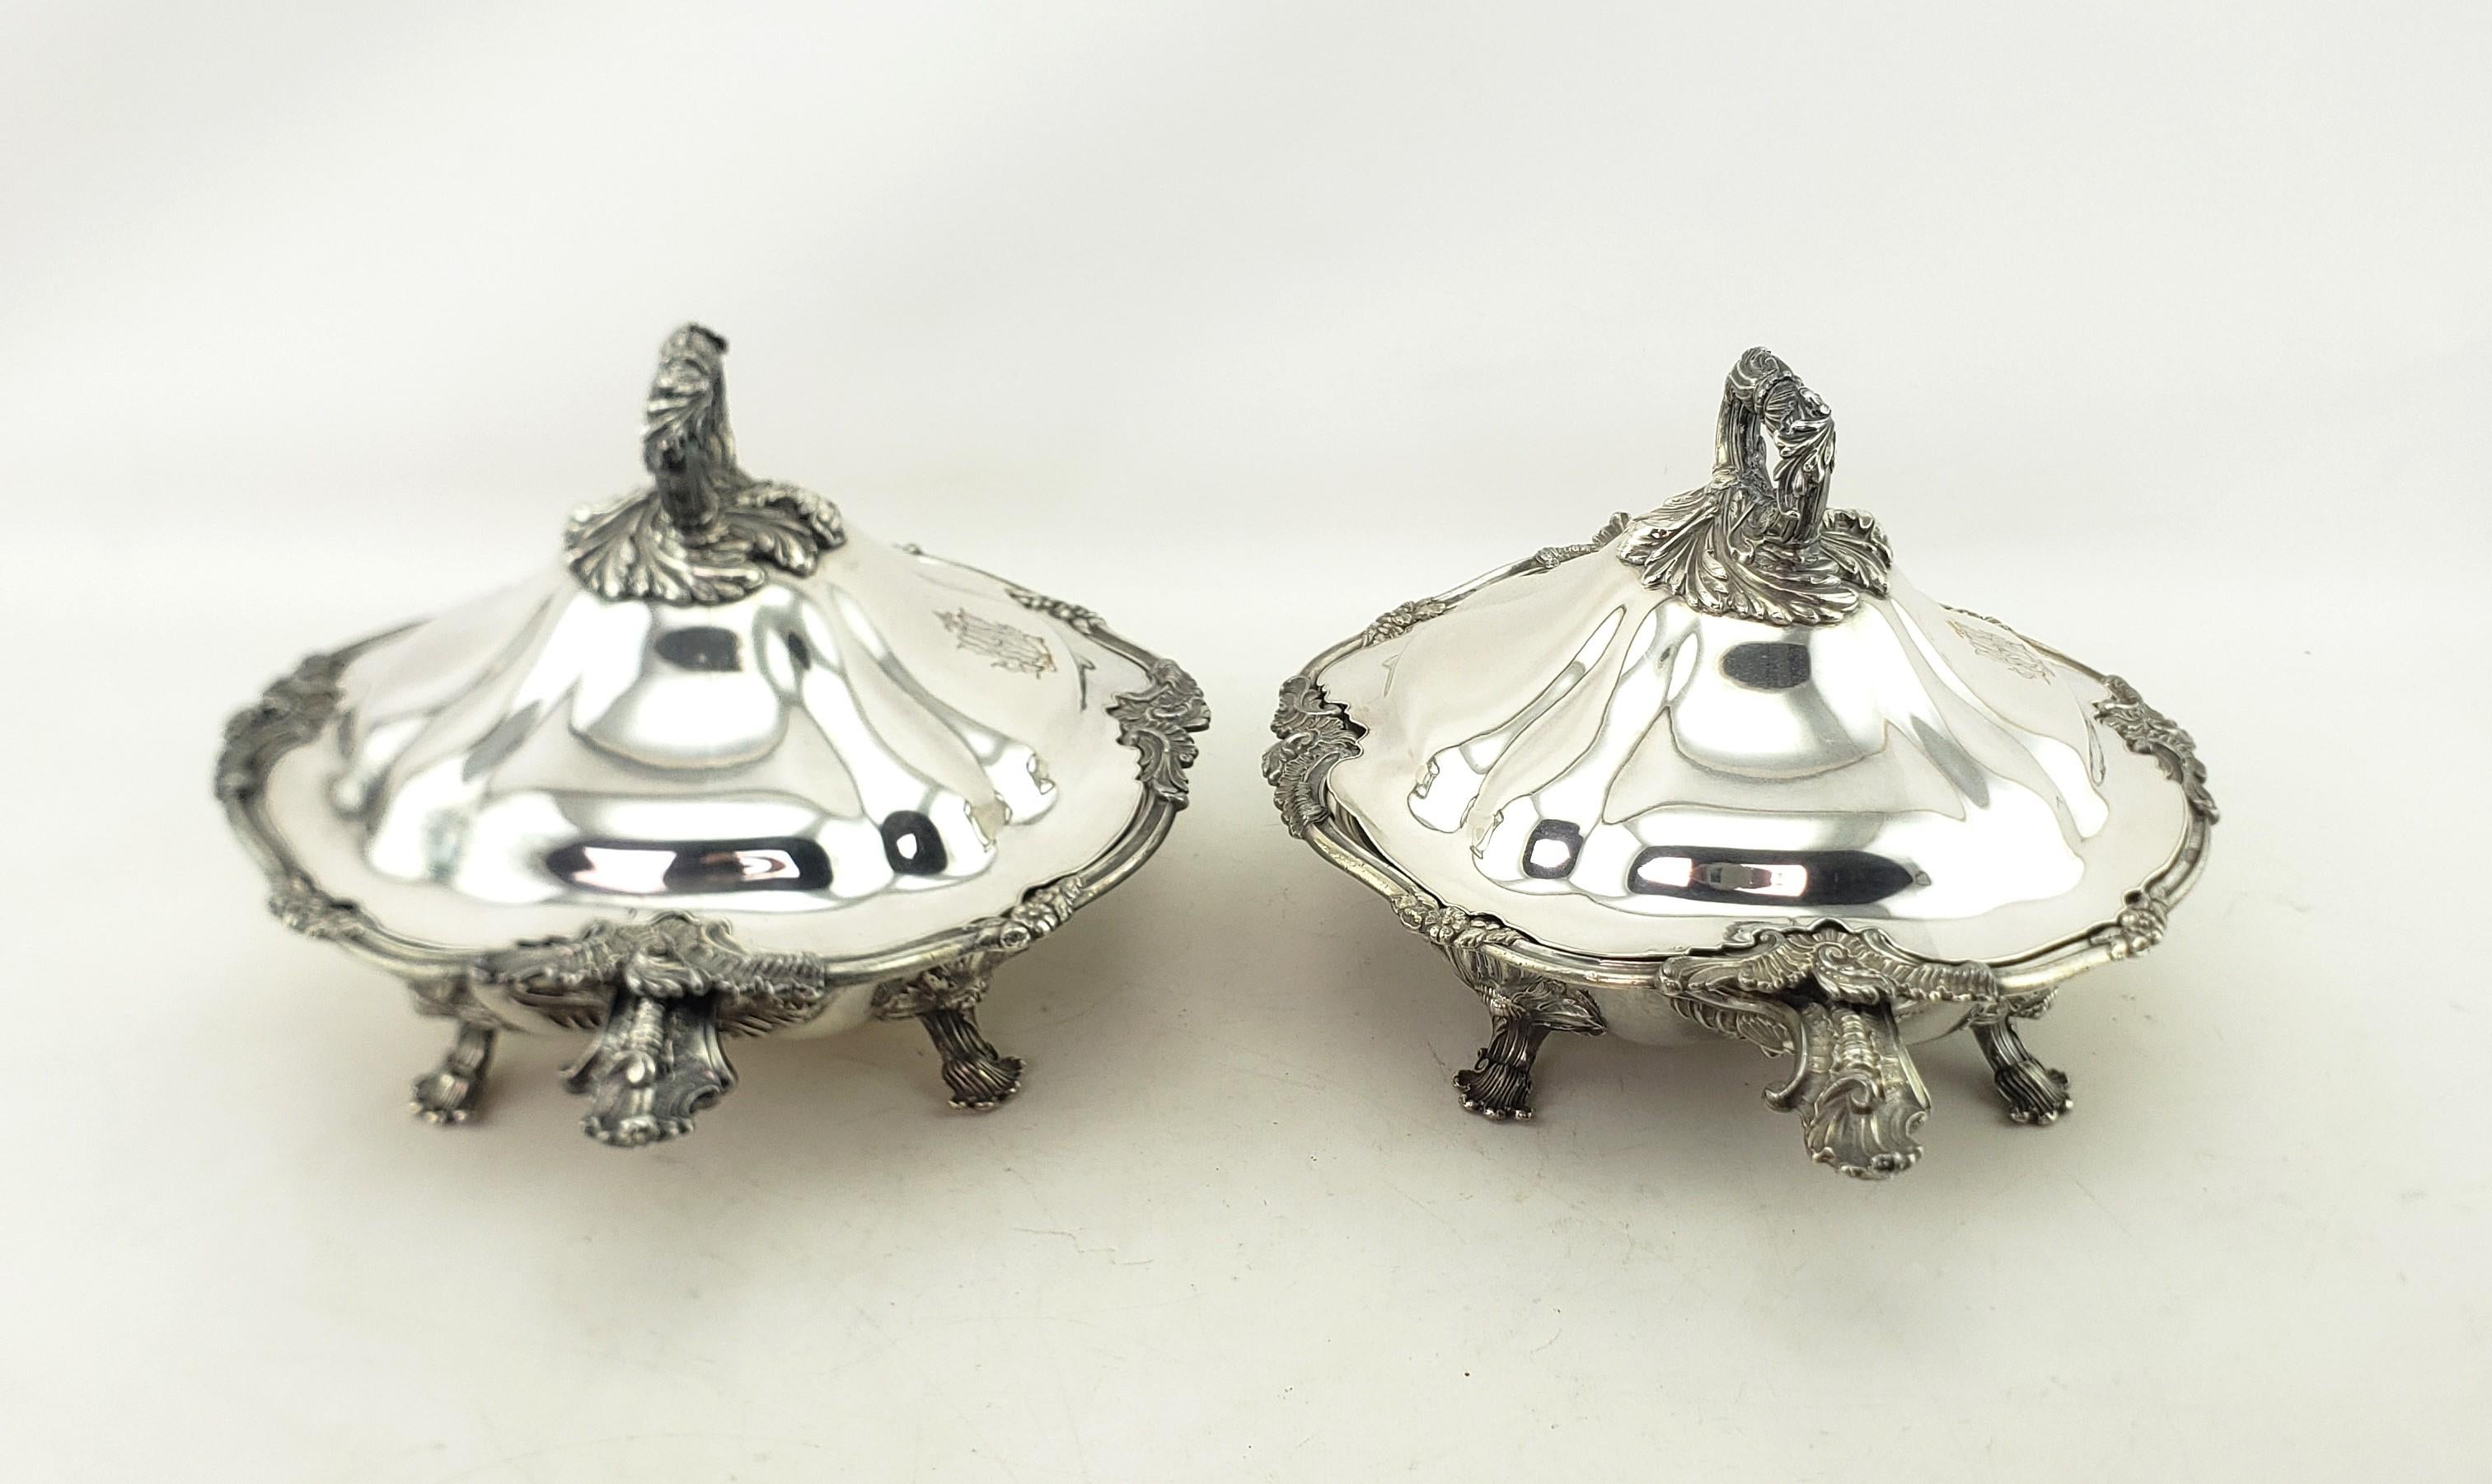 Three Antique Georgian Sheffield Plated Covered Tureens with Floral Decoration For Sale 9